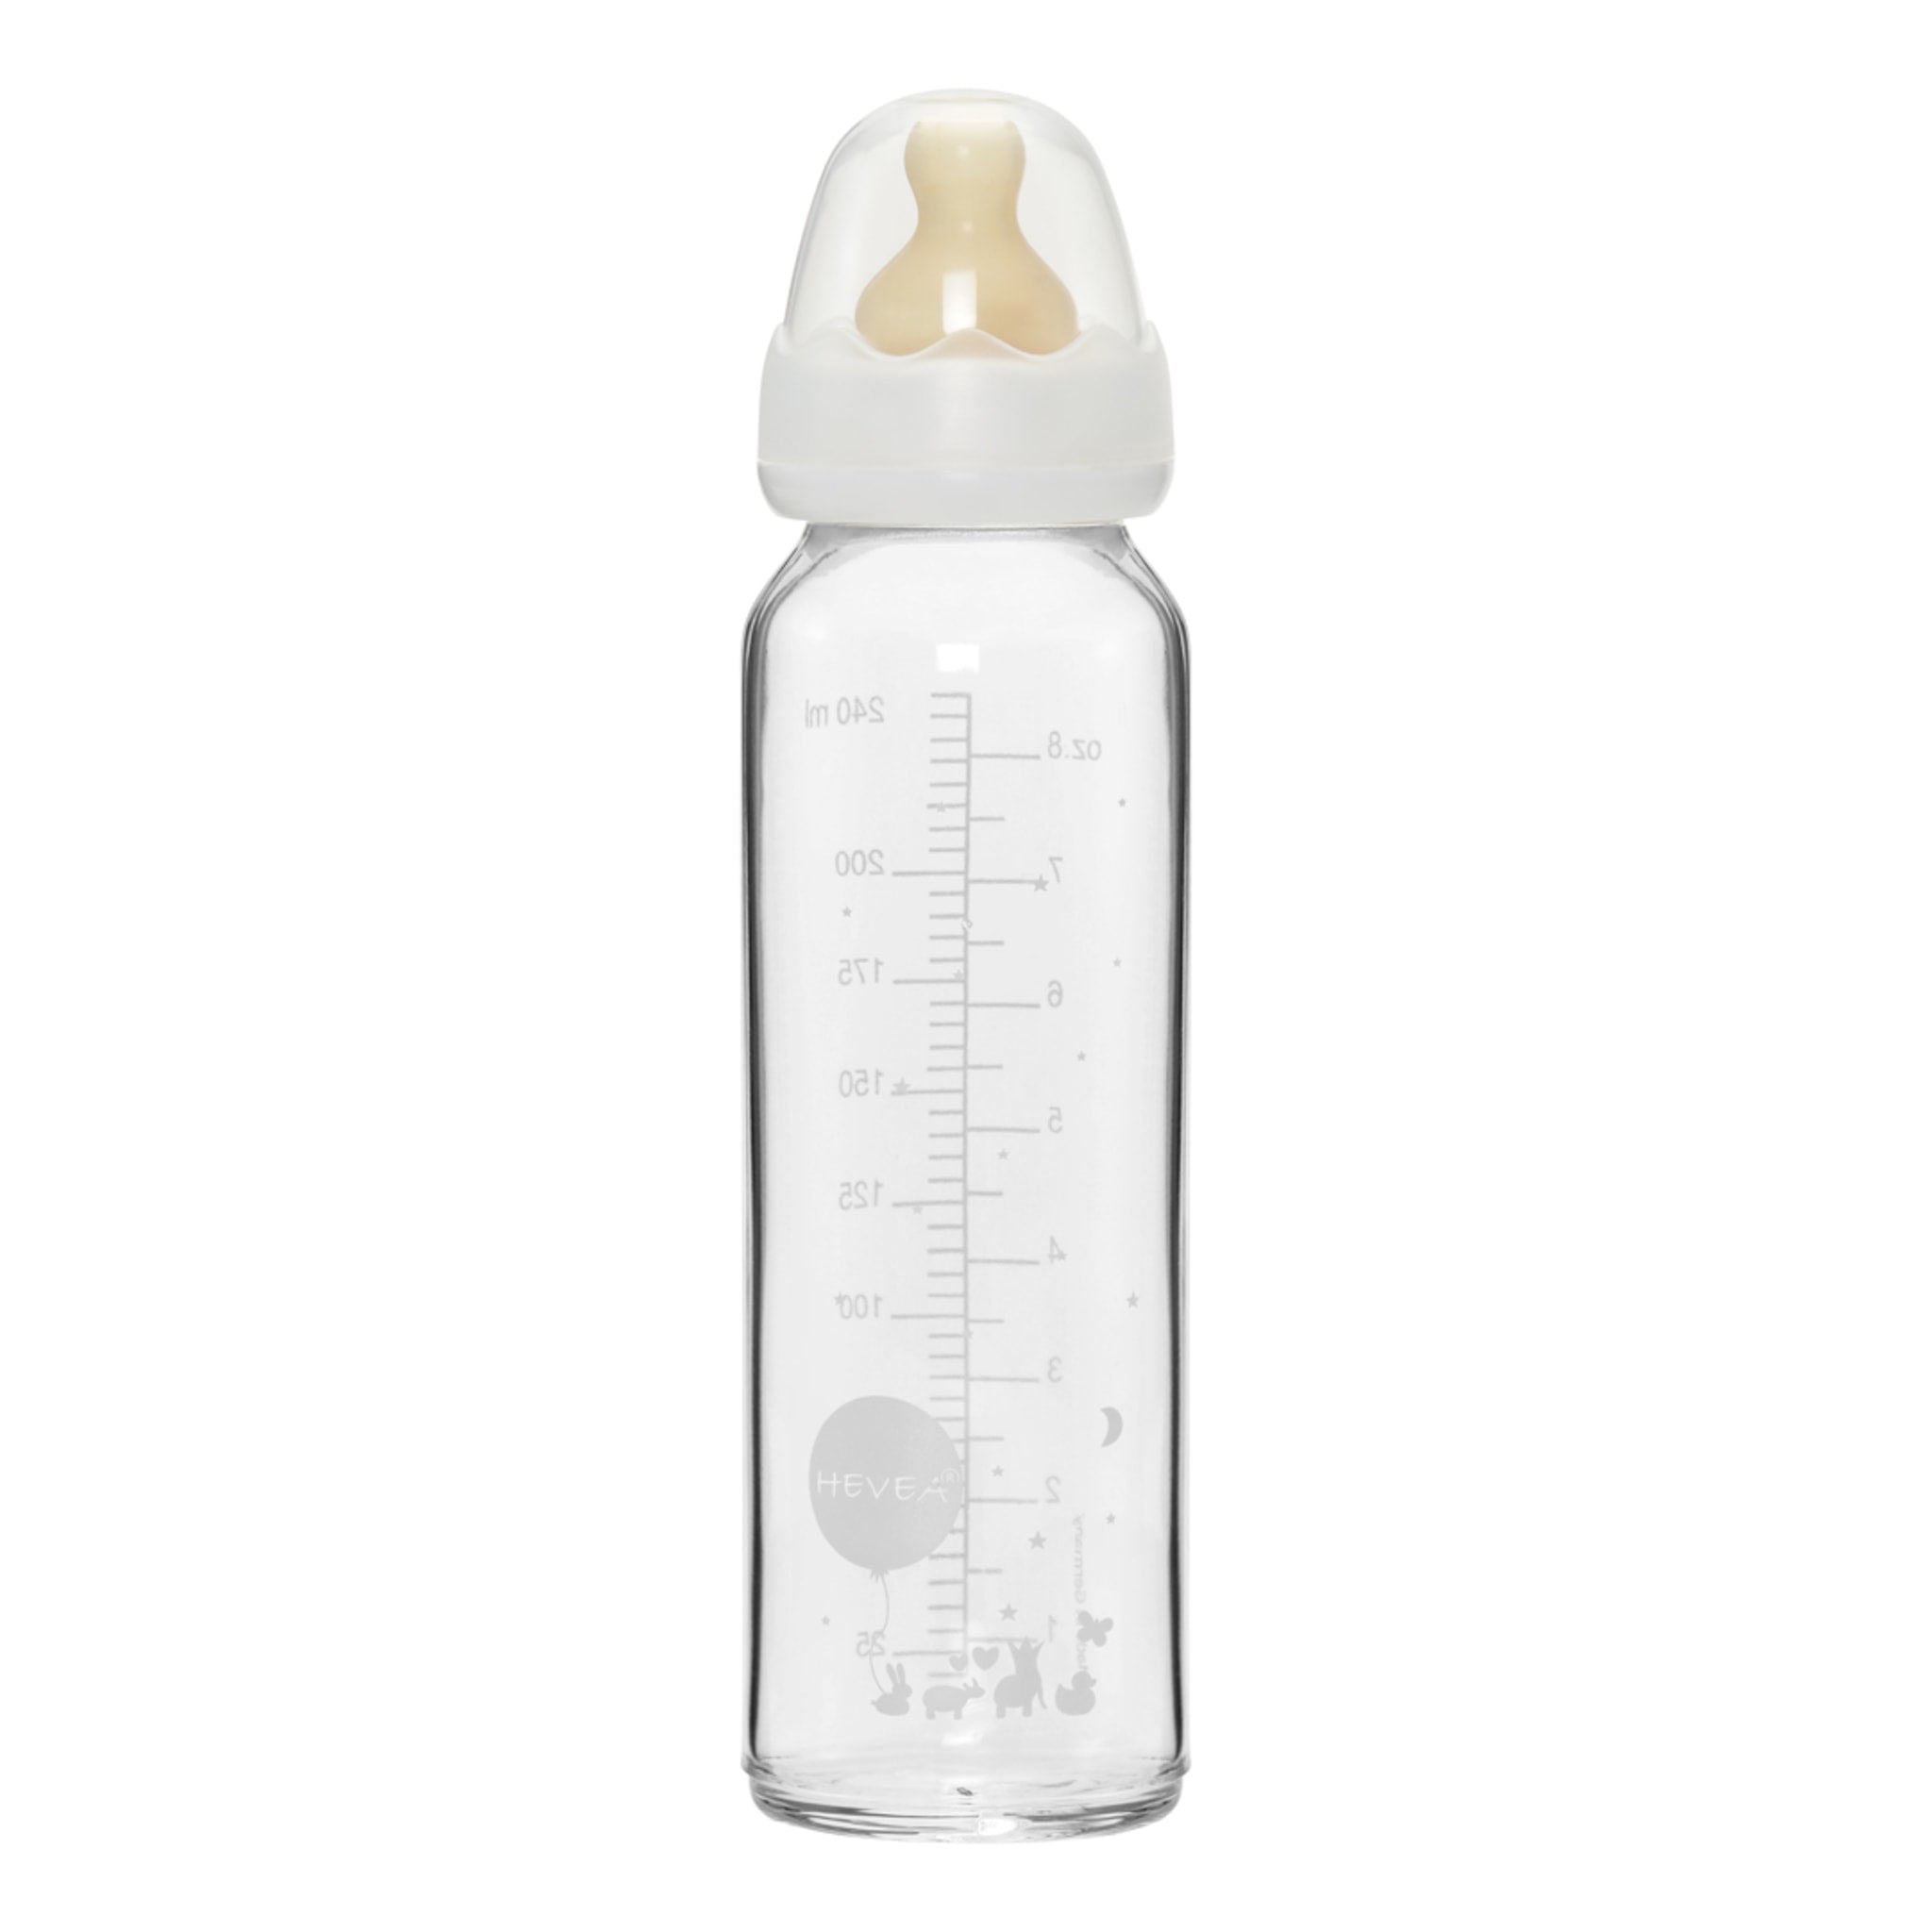 32-Oz Glass Milk Bottles with 8 White Caps (4 pack) - Food Grade